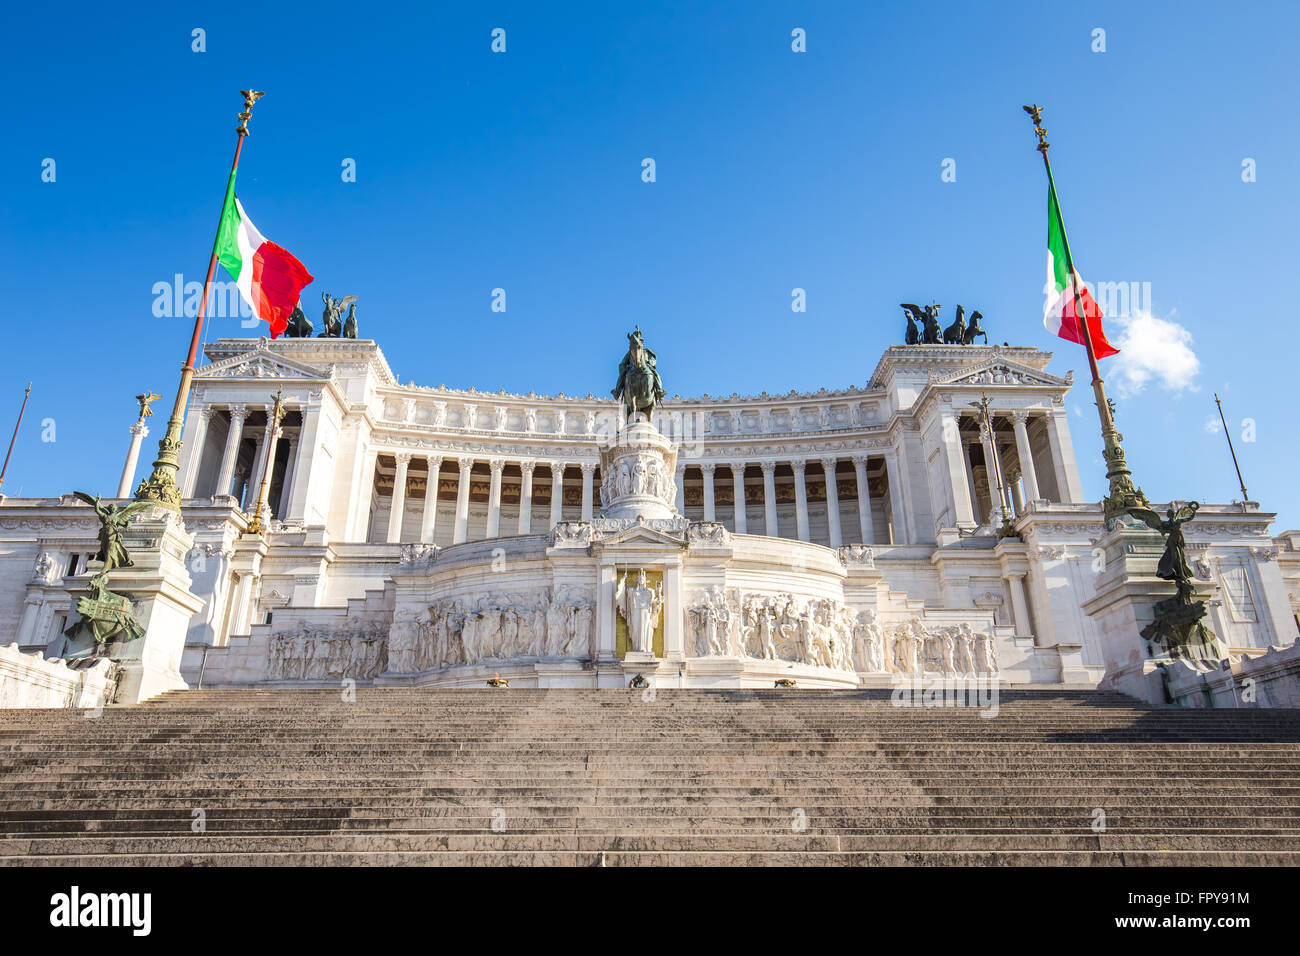 The Monument of Victor Emmanuel II in Rome, Italy. Stock Photo